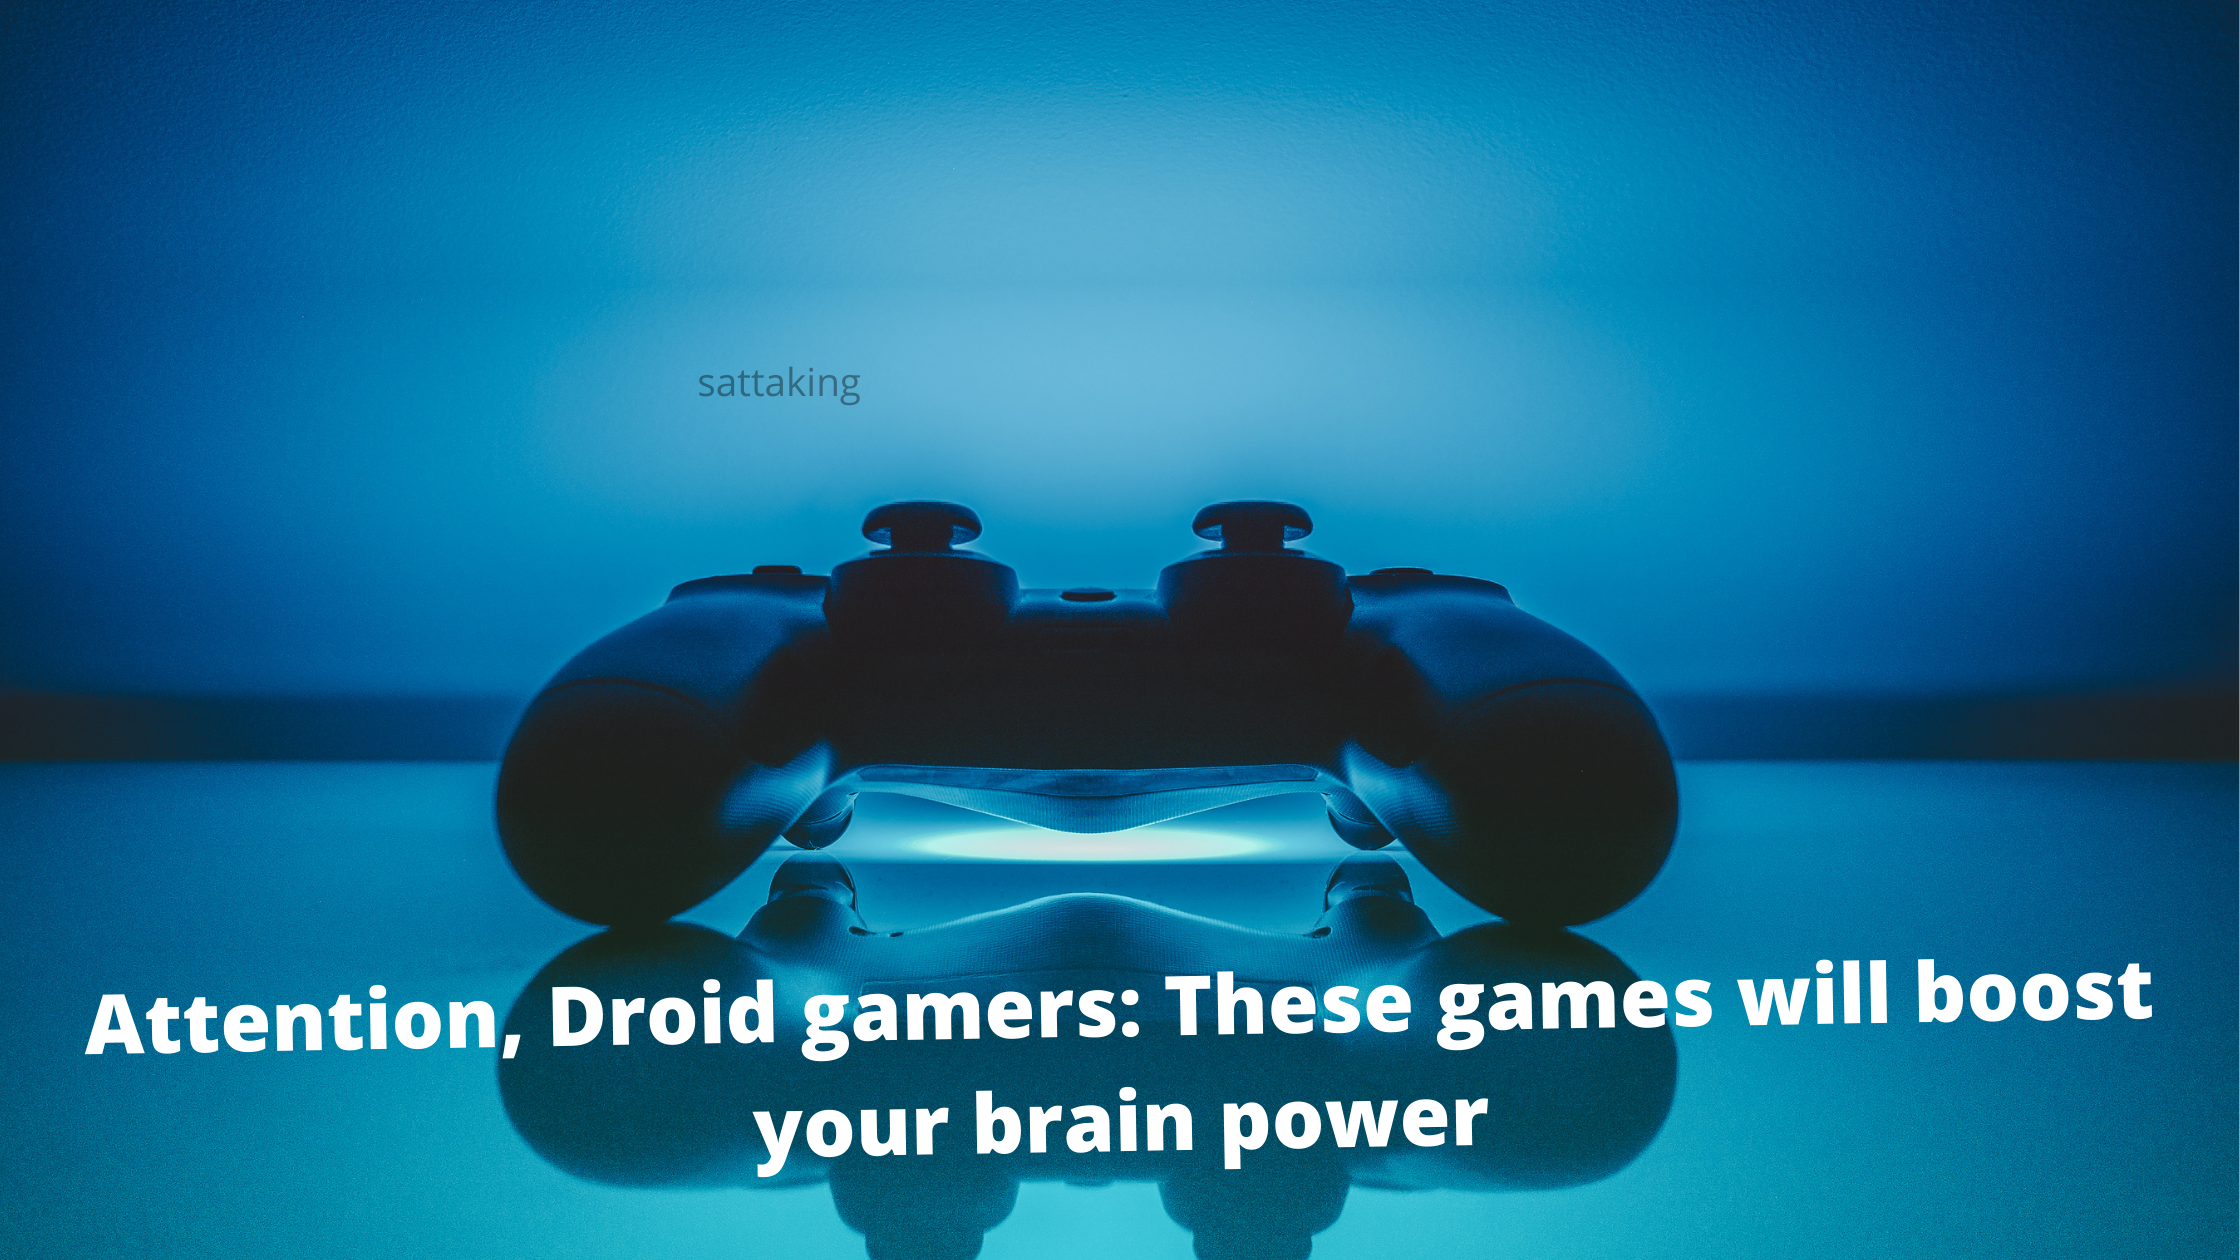 Attention, Droid gamers: These games will boost your brain power